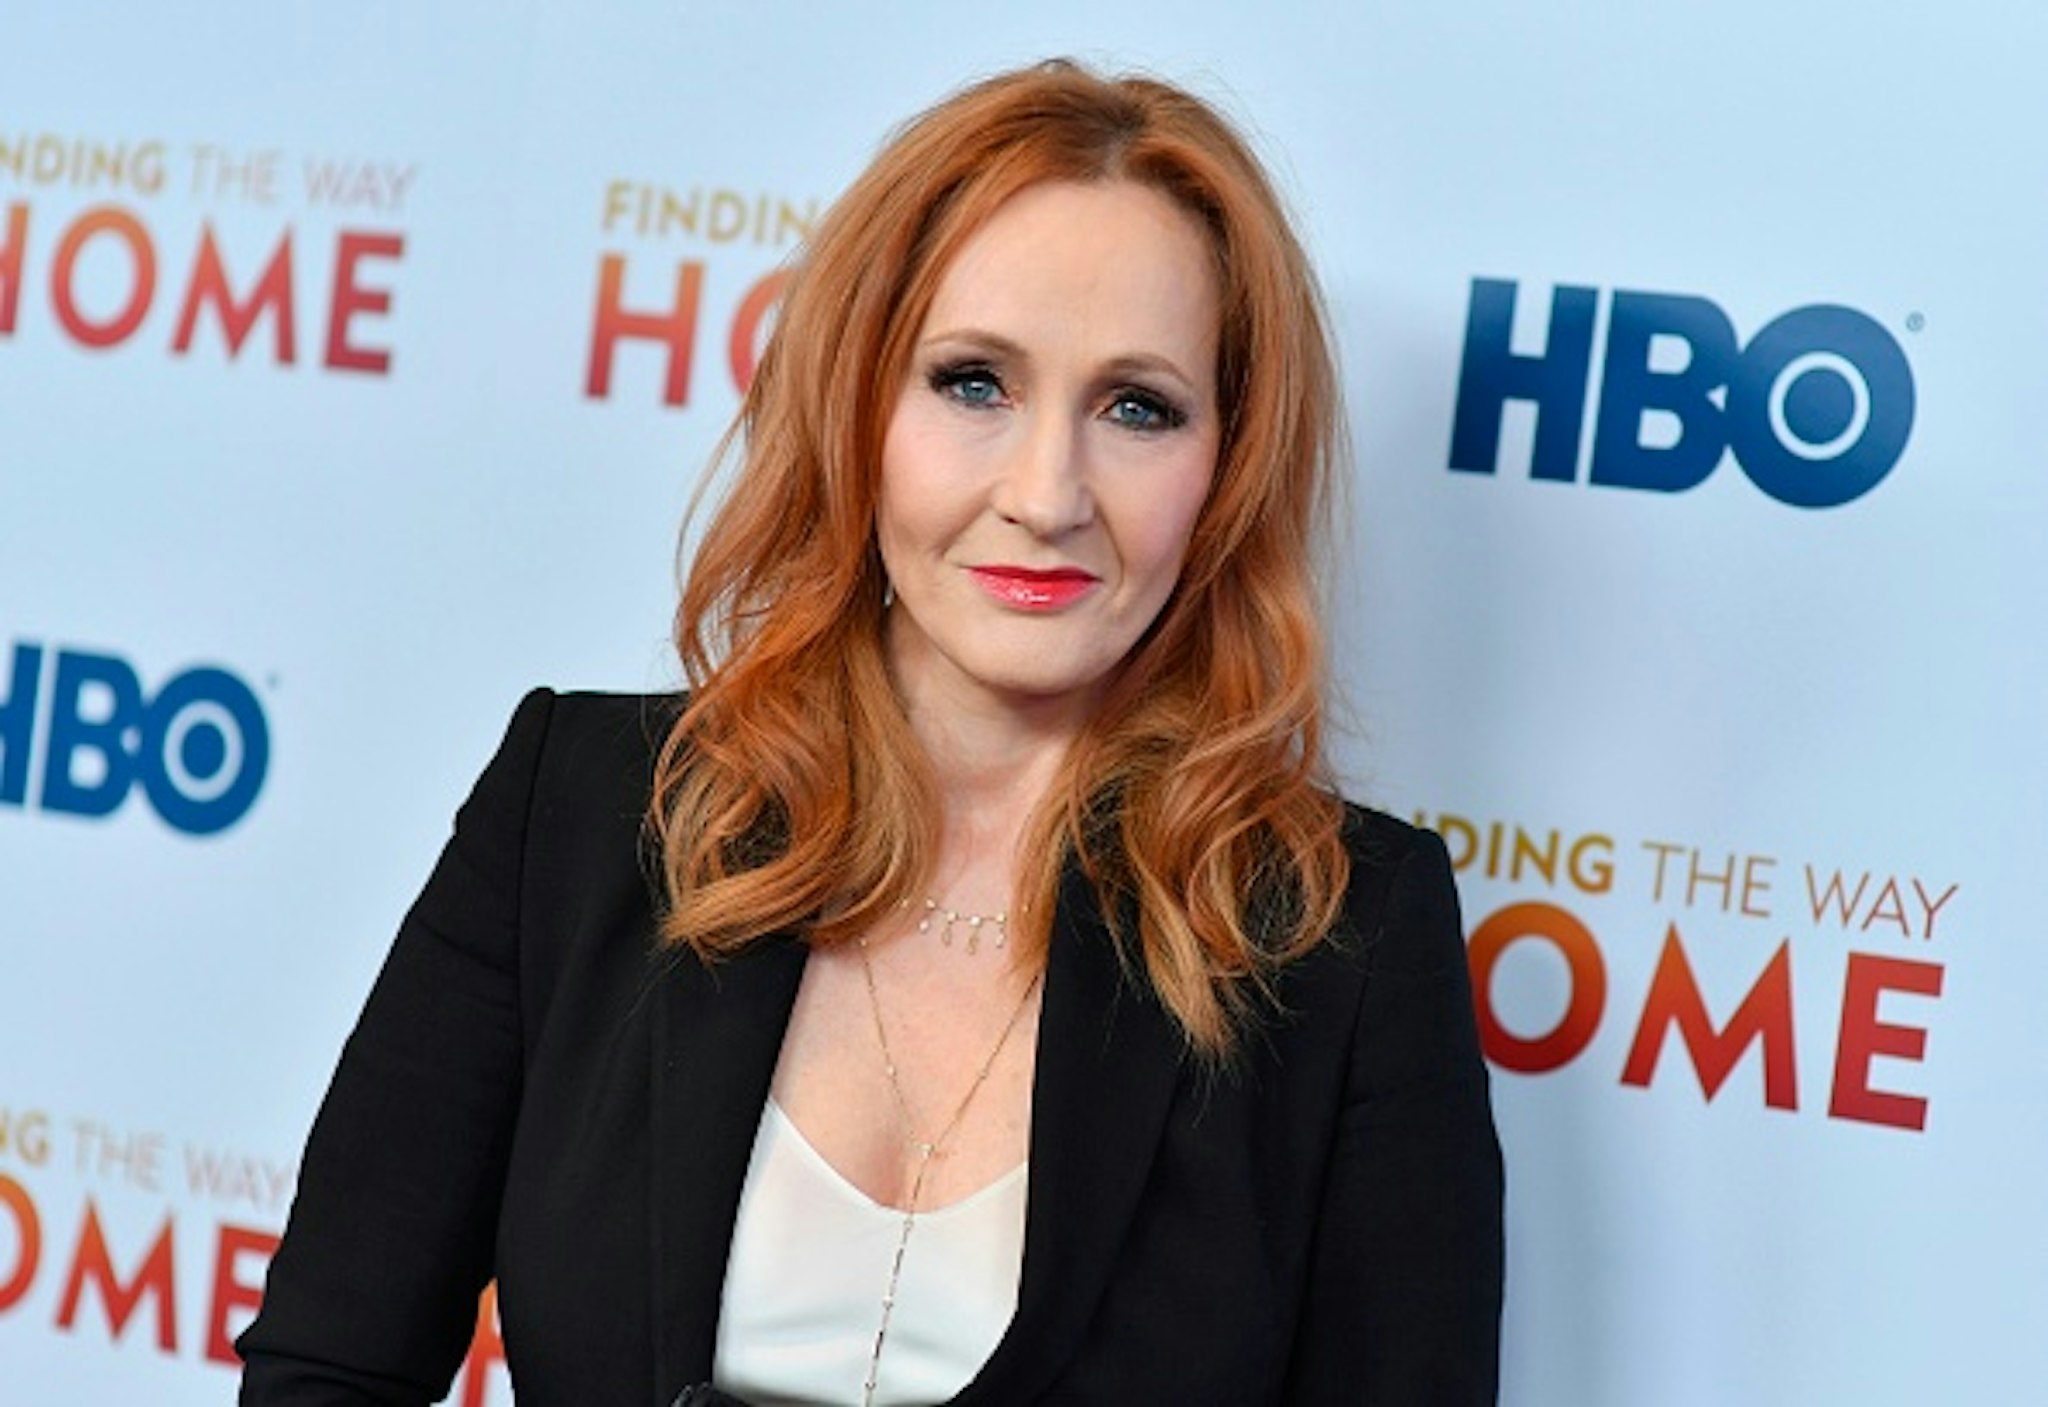 British author J. K. Rowling attends HBO's "Finding The Way Home" world premiere at Hudson Yards on December 11, 2019 in New York City.